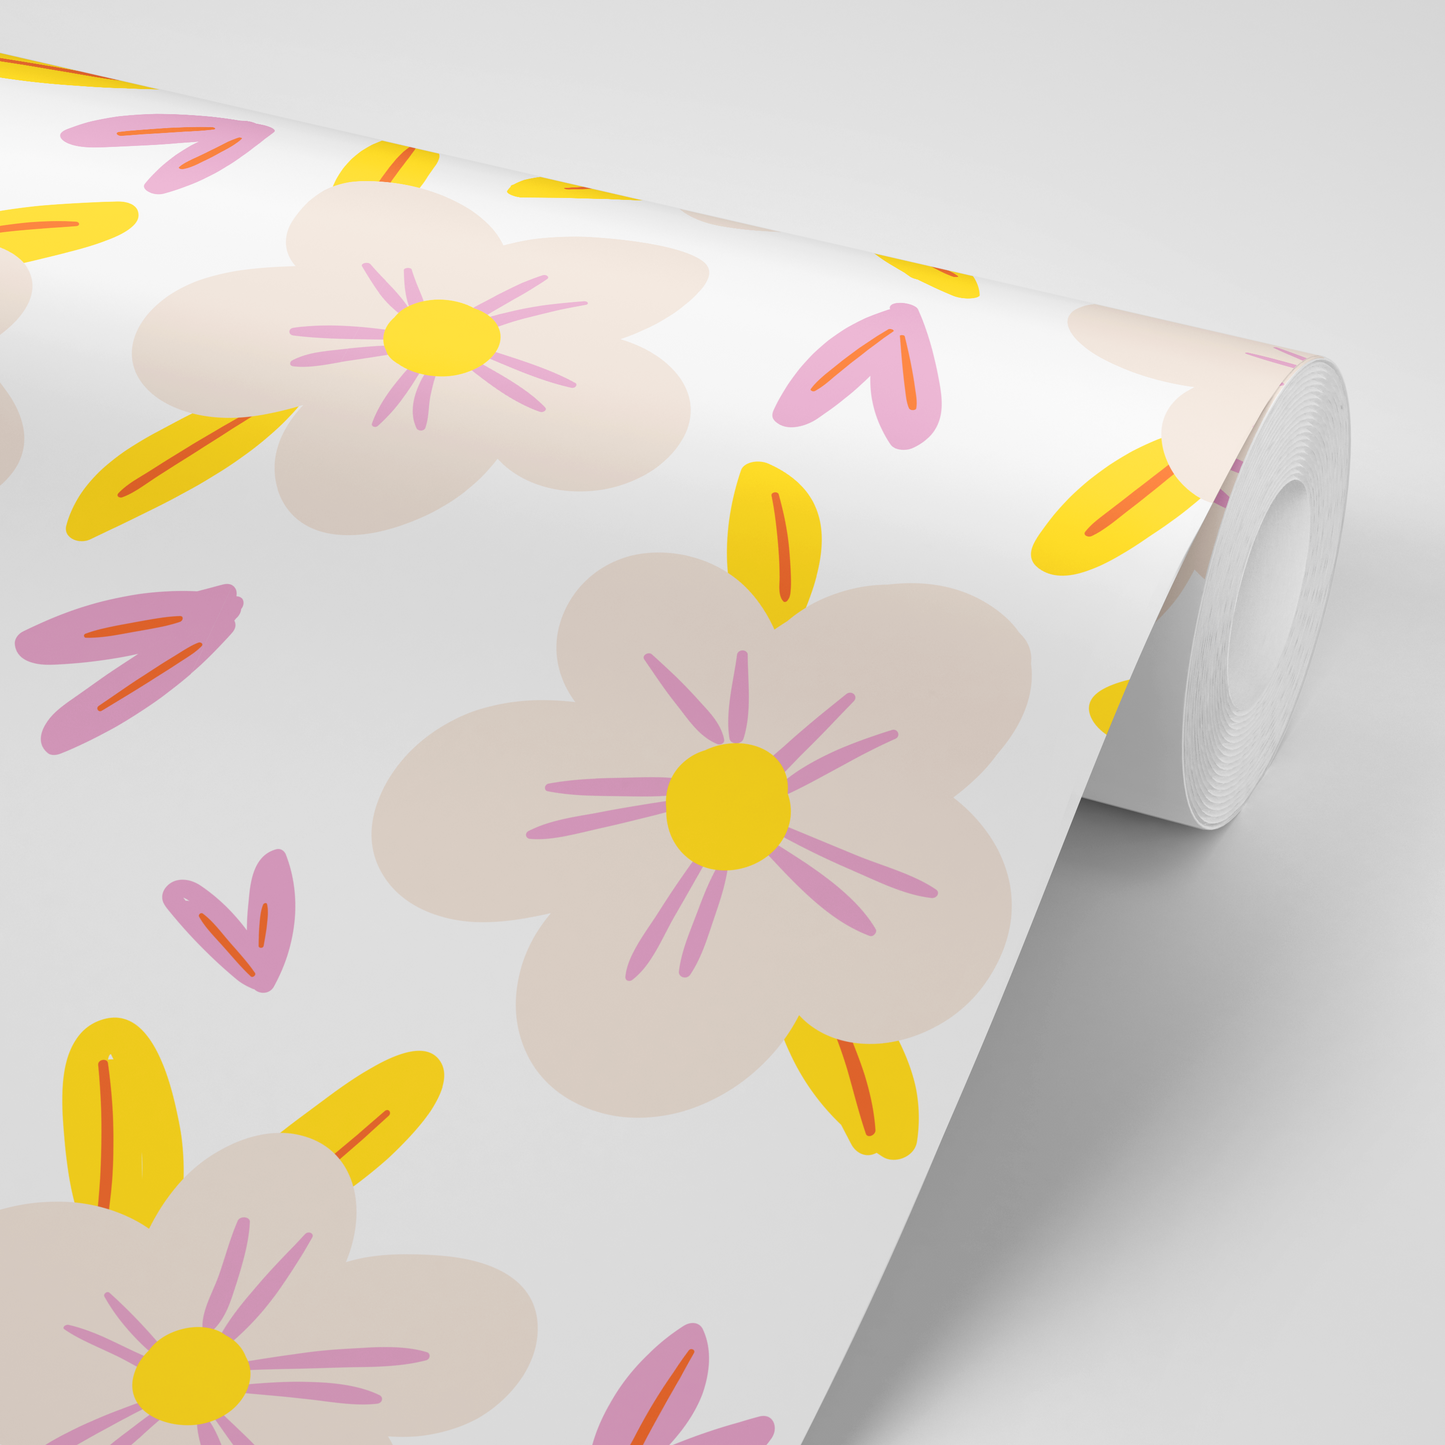 Flower Delight Contact Paper  - pack of 3 rolls (24x48" each)